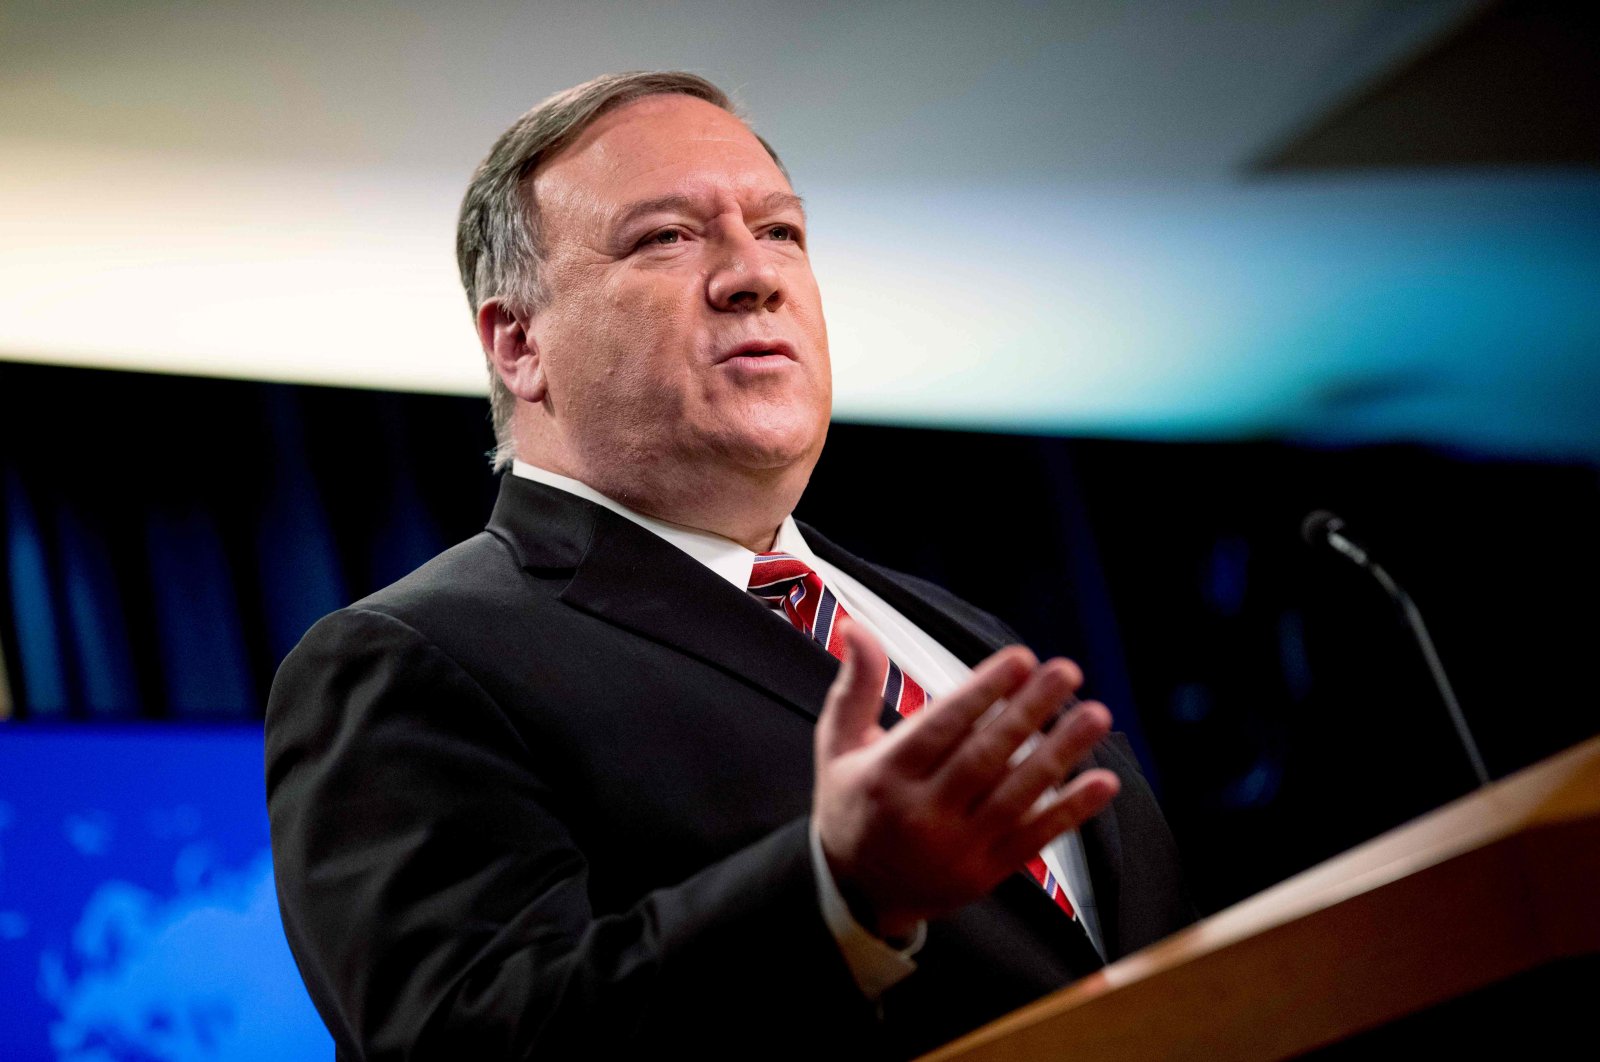 In this file photo, U.S. Secretary of State Mike Pompeo pauses while speaking at a news conference at the State Department on April 29, 2020, in Washington,D.C. (AFP Photo)